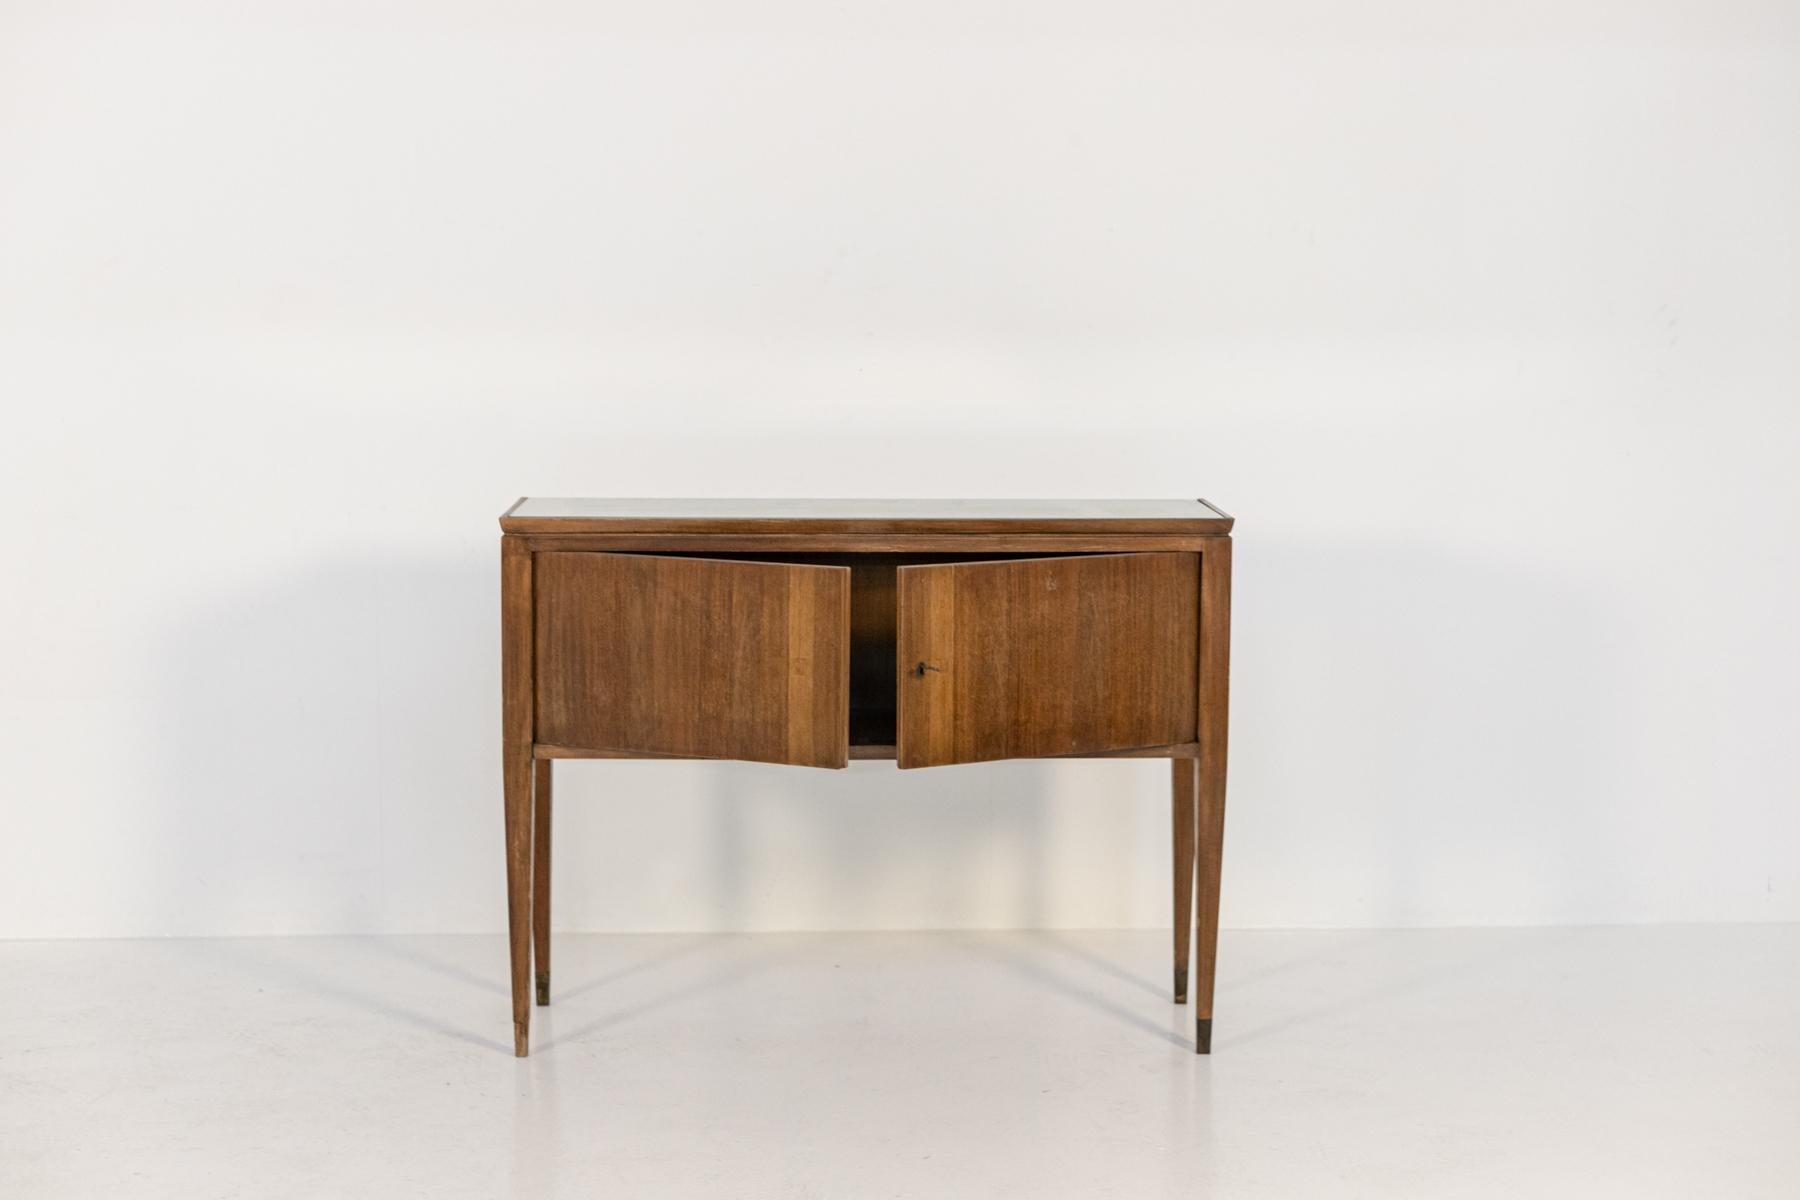 Elegant wooden console or small sideboard from the 1950's attributed to Gio Ponti.The console has a top covered with its original glass of the time still in excellent condition. Excellent Italian workmanship and original condition. The structure is